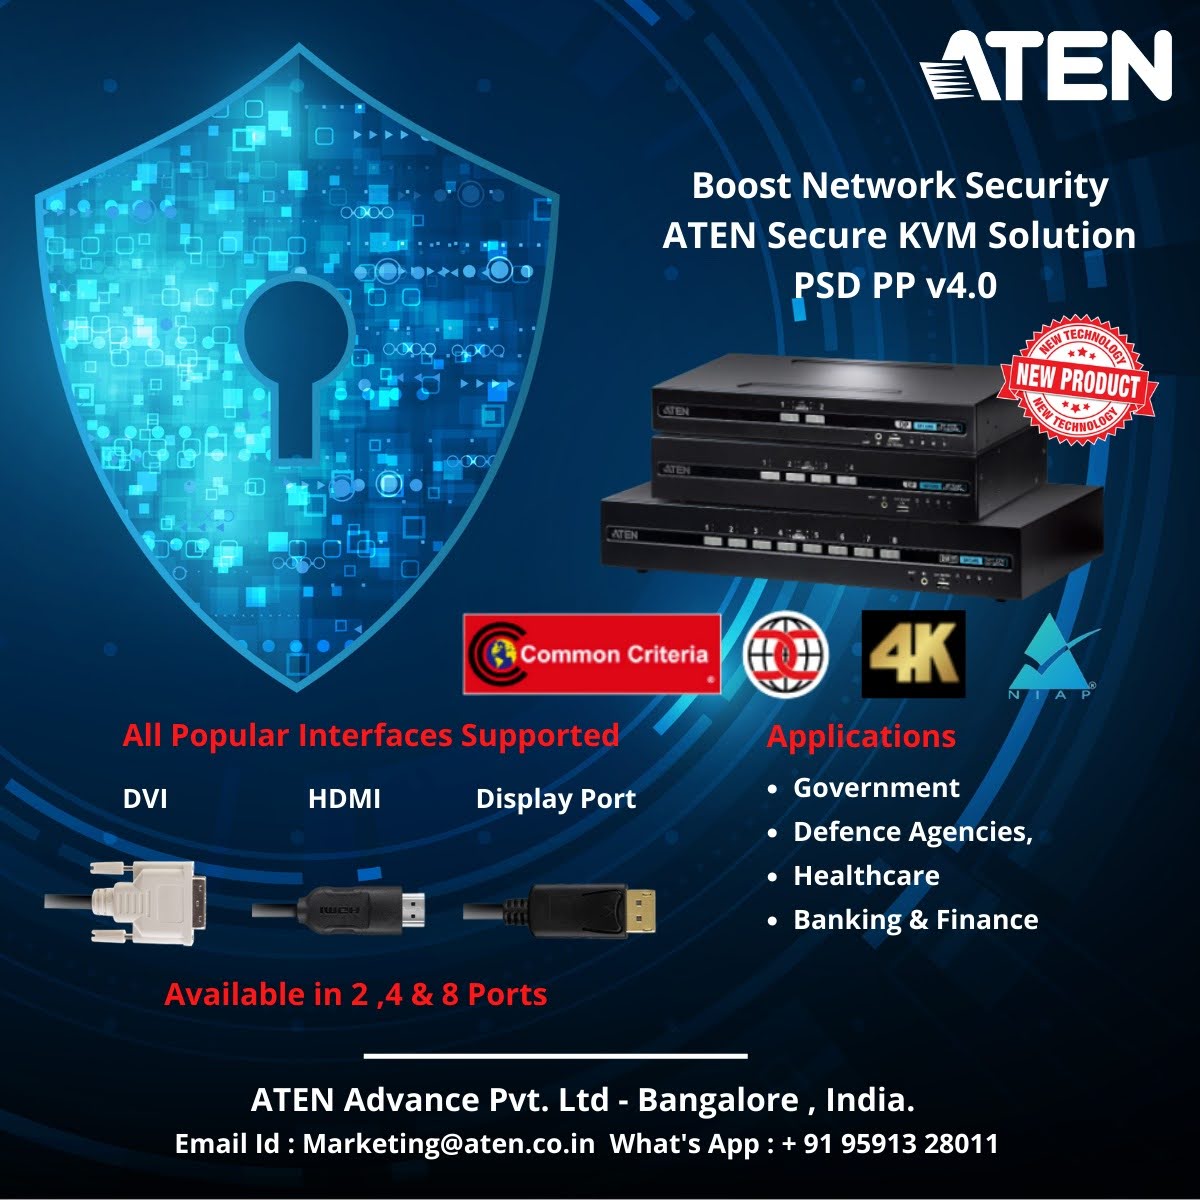 ATEN Secure KVM Solutions Designed with Multi-layer Security for Securing Data Access while Boosting Network Security